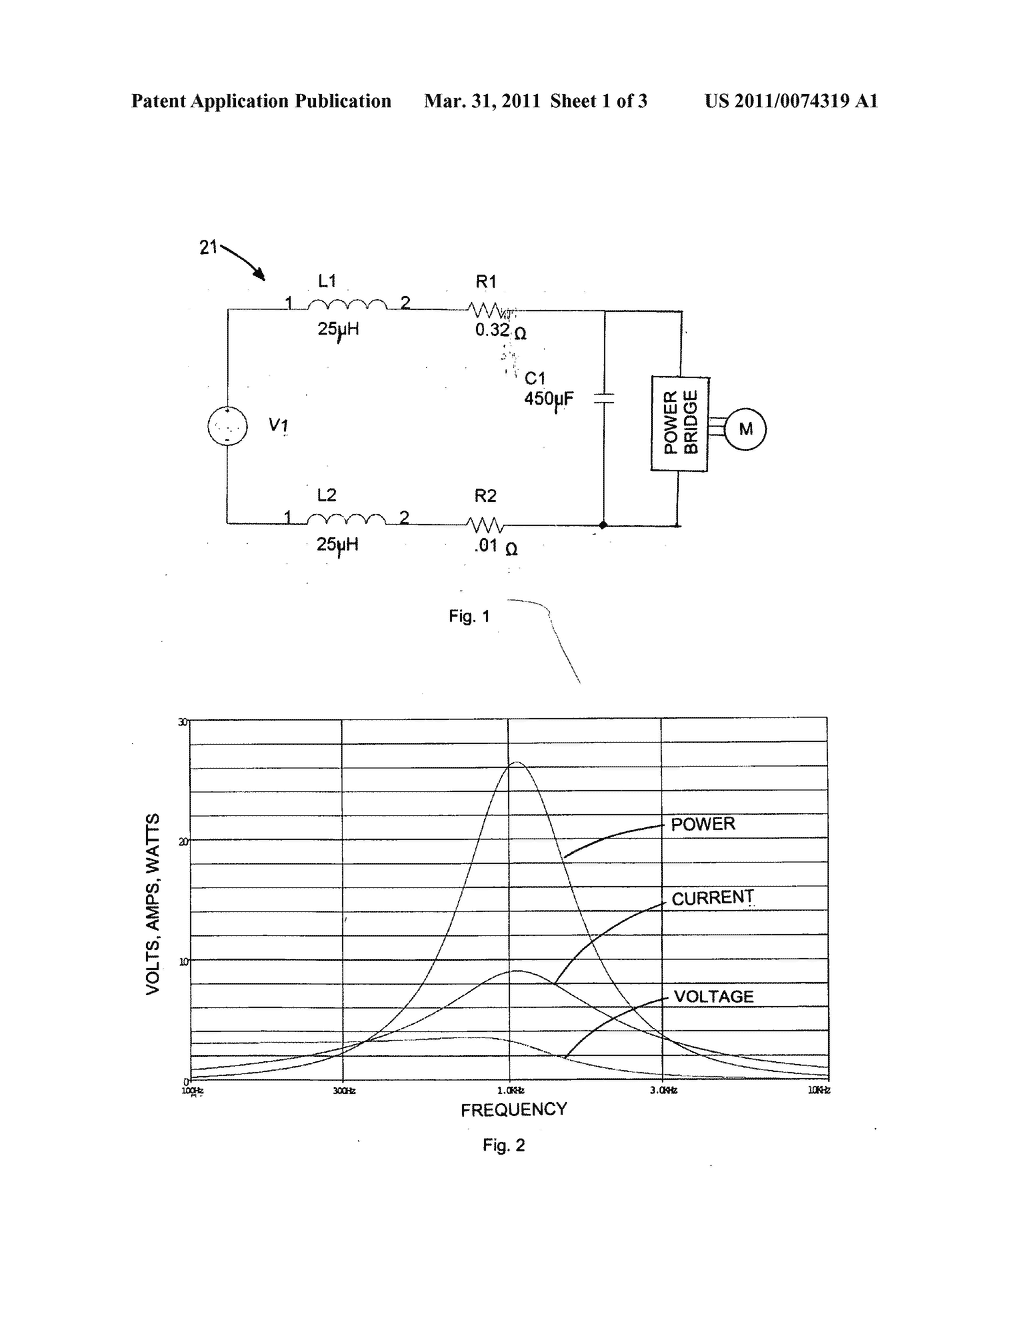 DEVICE FOR CONTROLLING REGENERATION ENERGY IN AN ELECTRONIC MOTOR DRIVE HAVING AN LC FILTER TO REDUCE CONDUCTED EMISSIONS FROM THE MOTOR BACK TO THE VOLTAGE SOURCE - diagram, schematic, and image 02